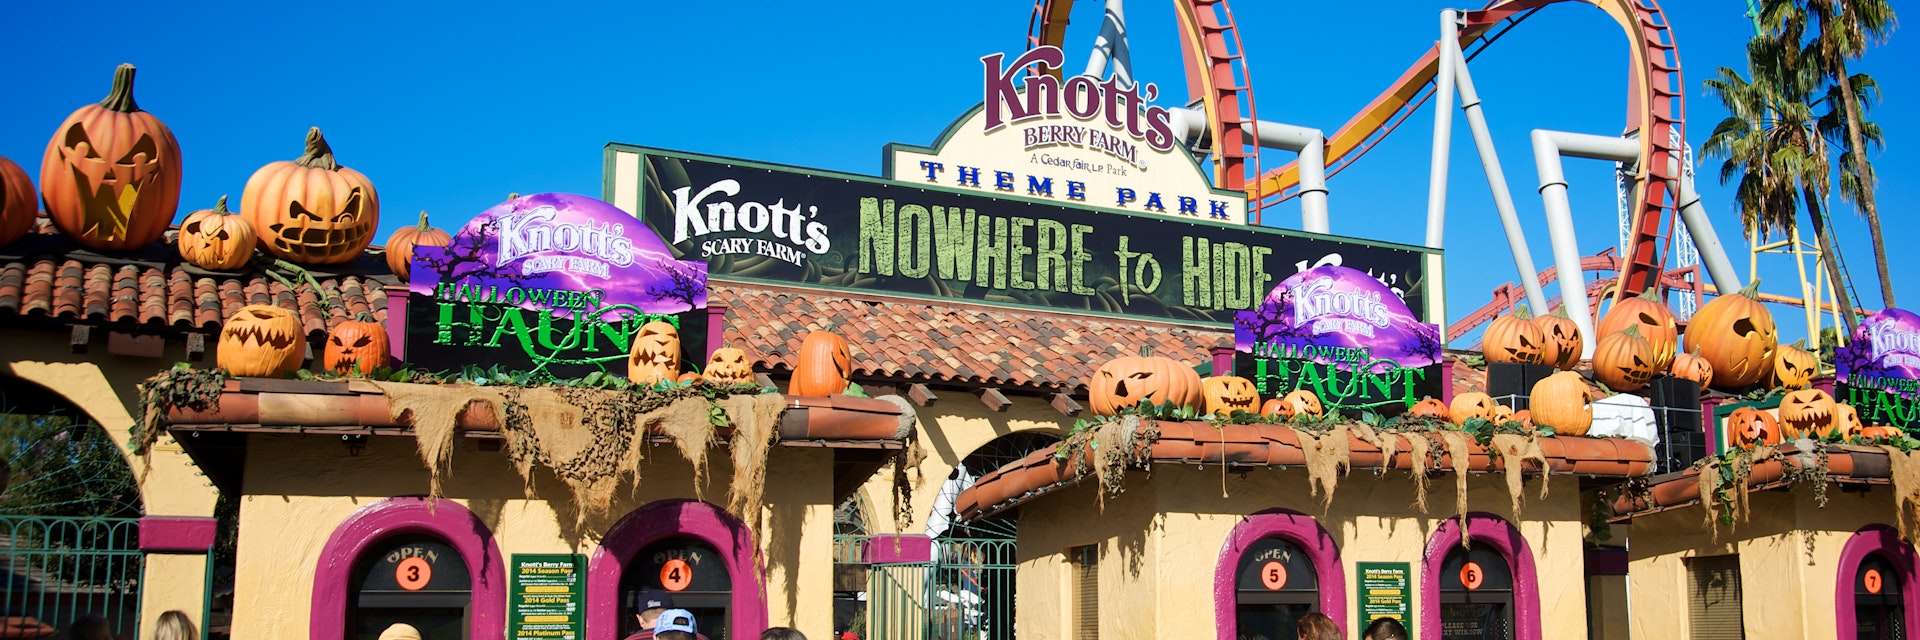 People entering Knott's Scary Farm at Knott's Berry Farm, celebrating a Southern California Halloween tradition, on October 14, 2013.